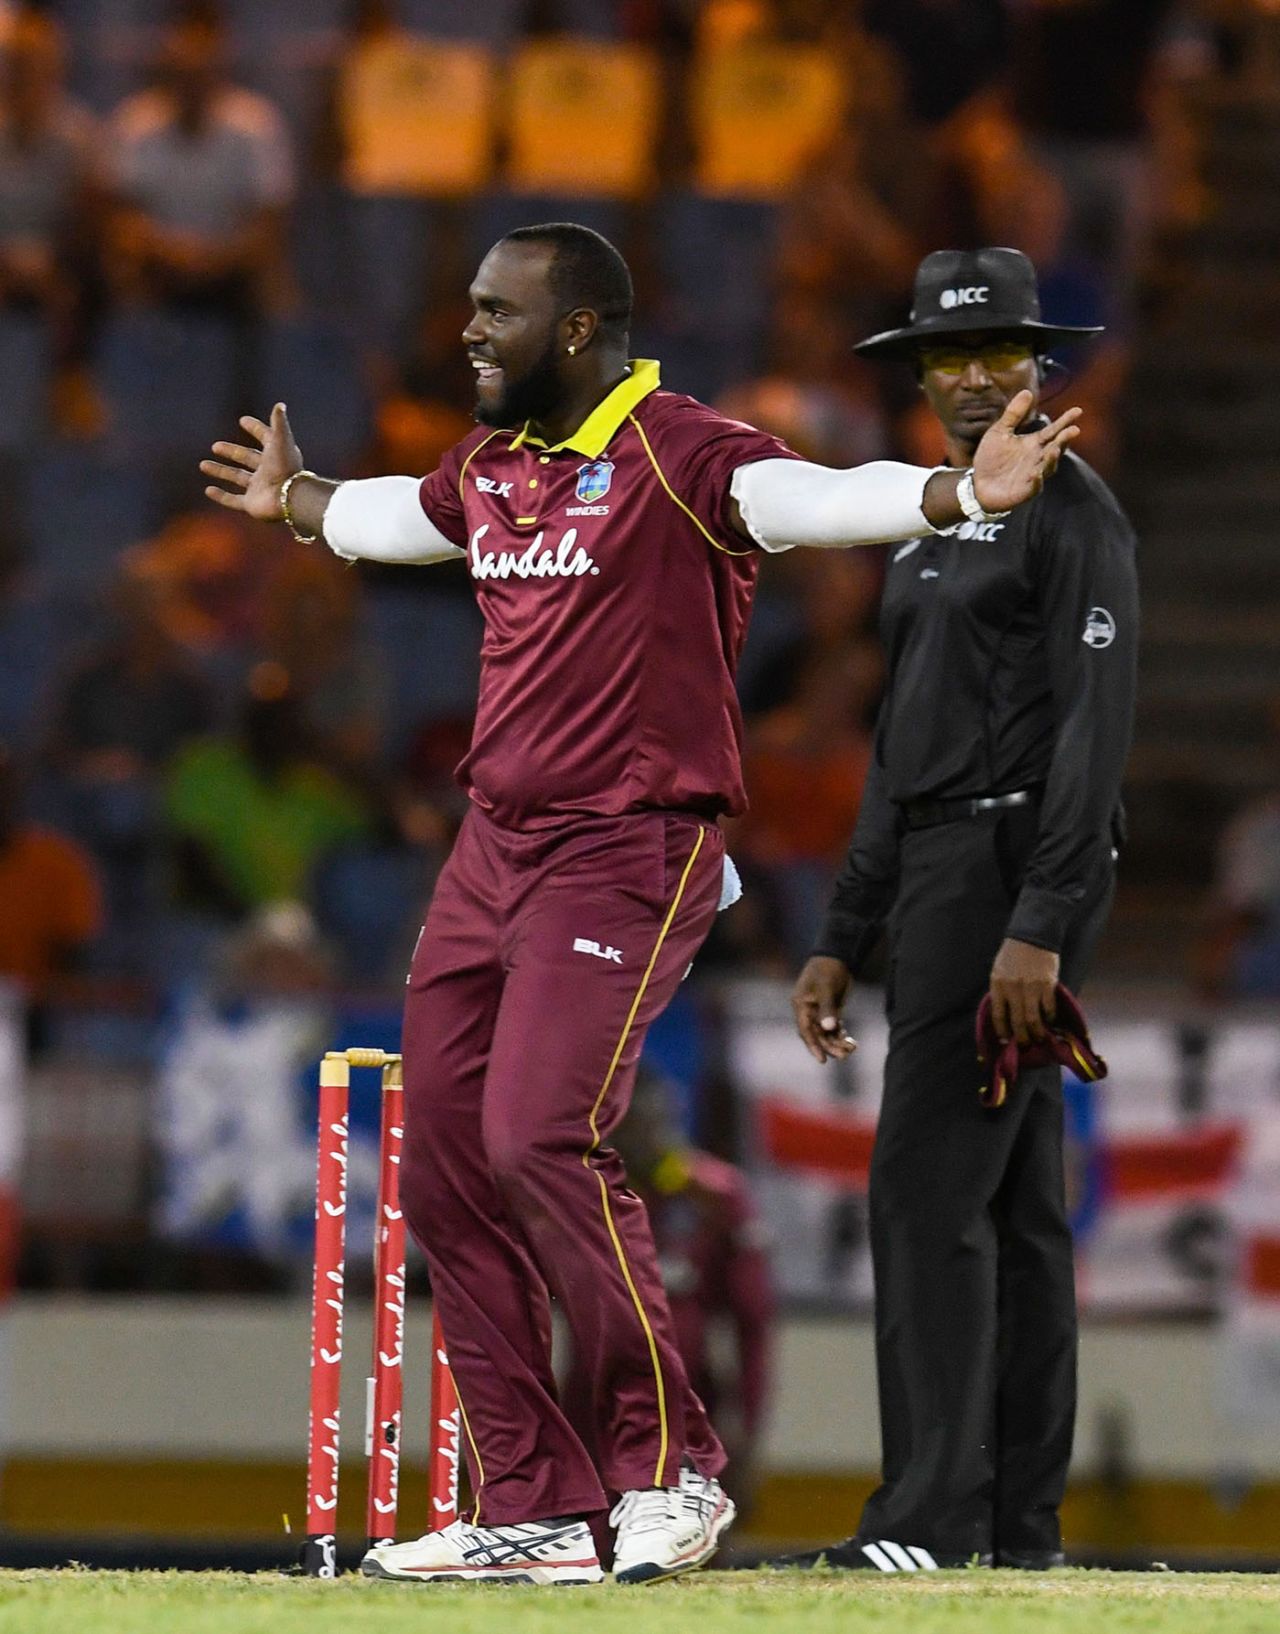 Ashley Nurse brings out a celebratory dance, West Indies v England, 1st T20I, St Lucia, March 5, 2019